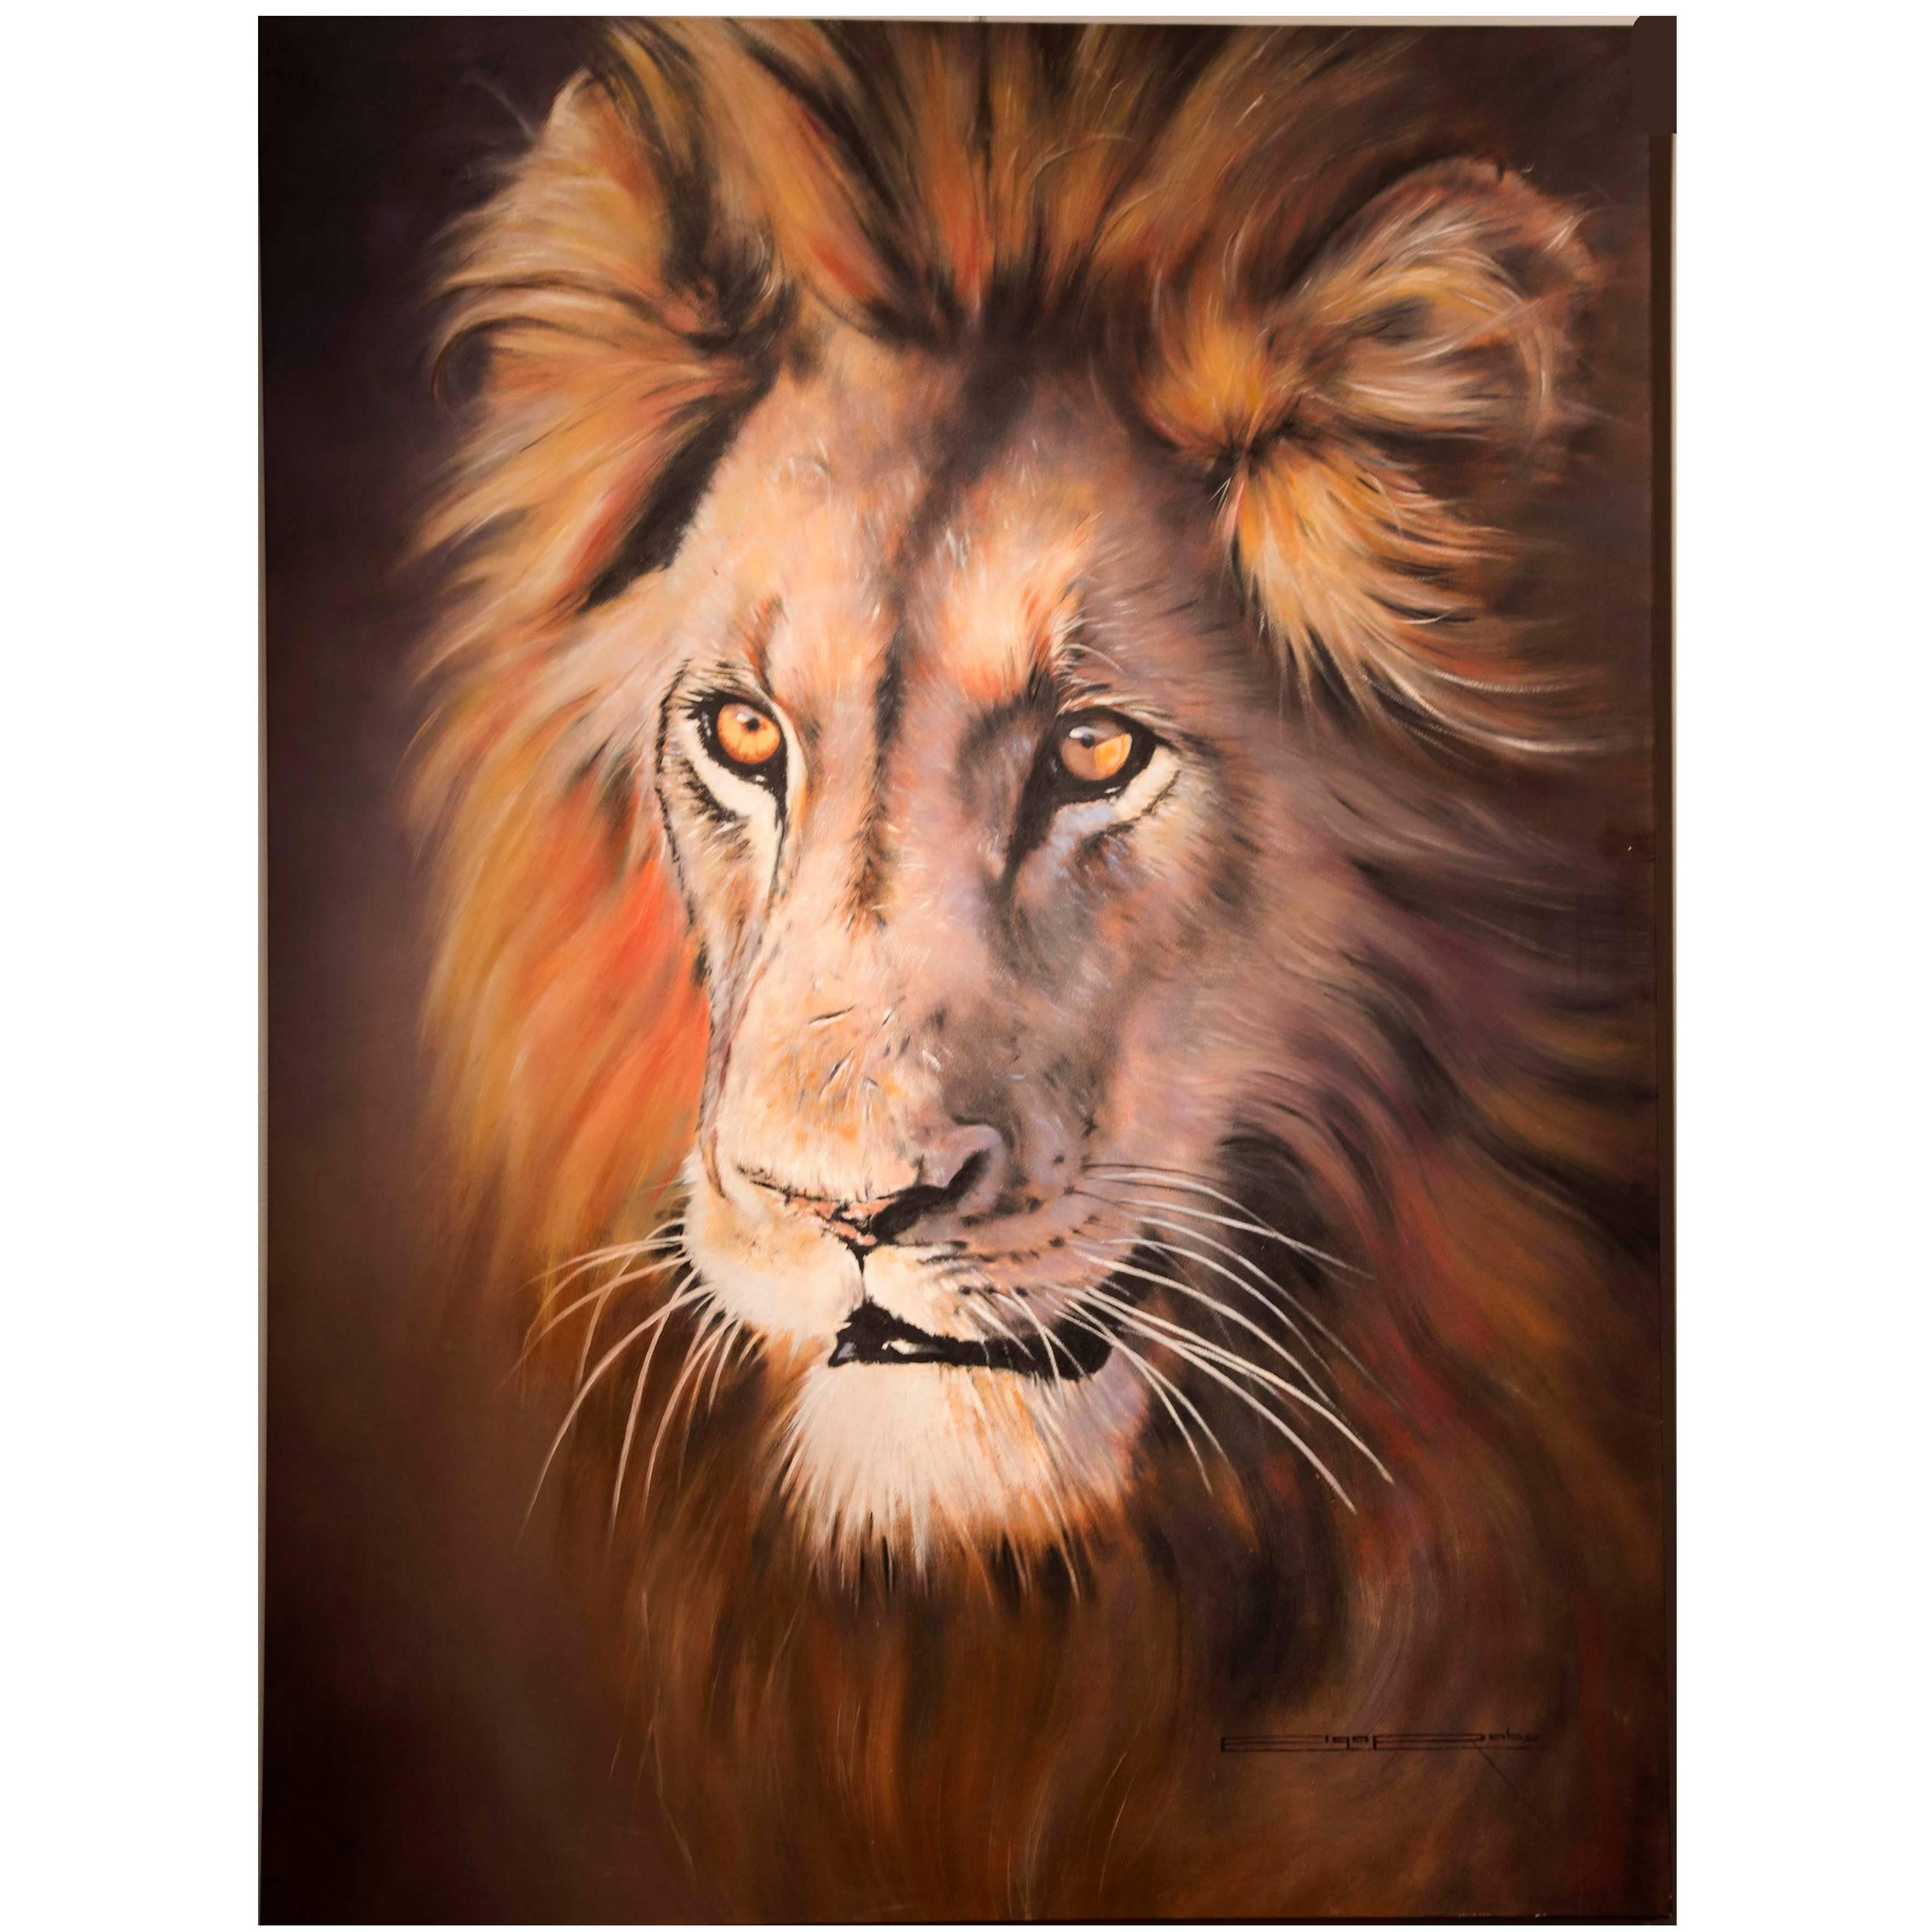 Magnificent African Lion Oil on Canvas Portrait by Elga Rabe